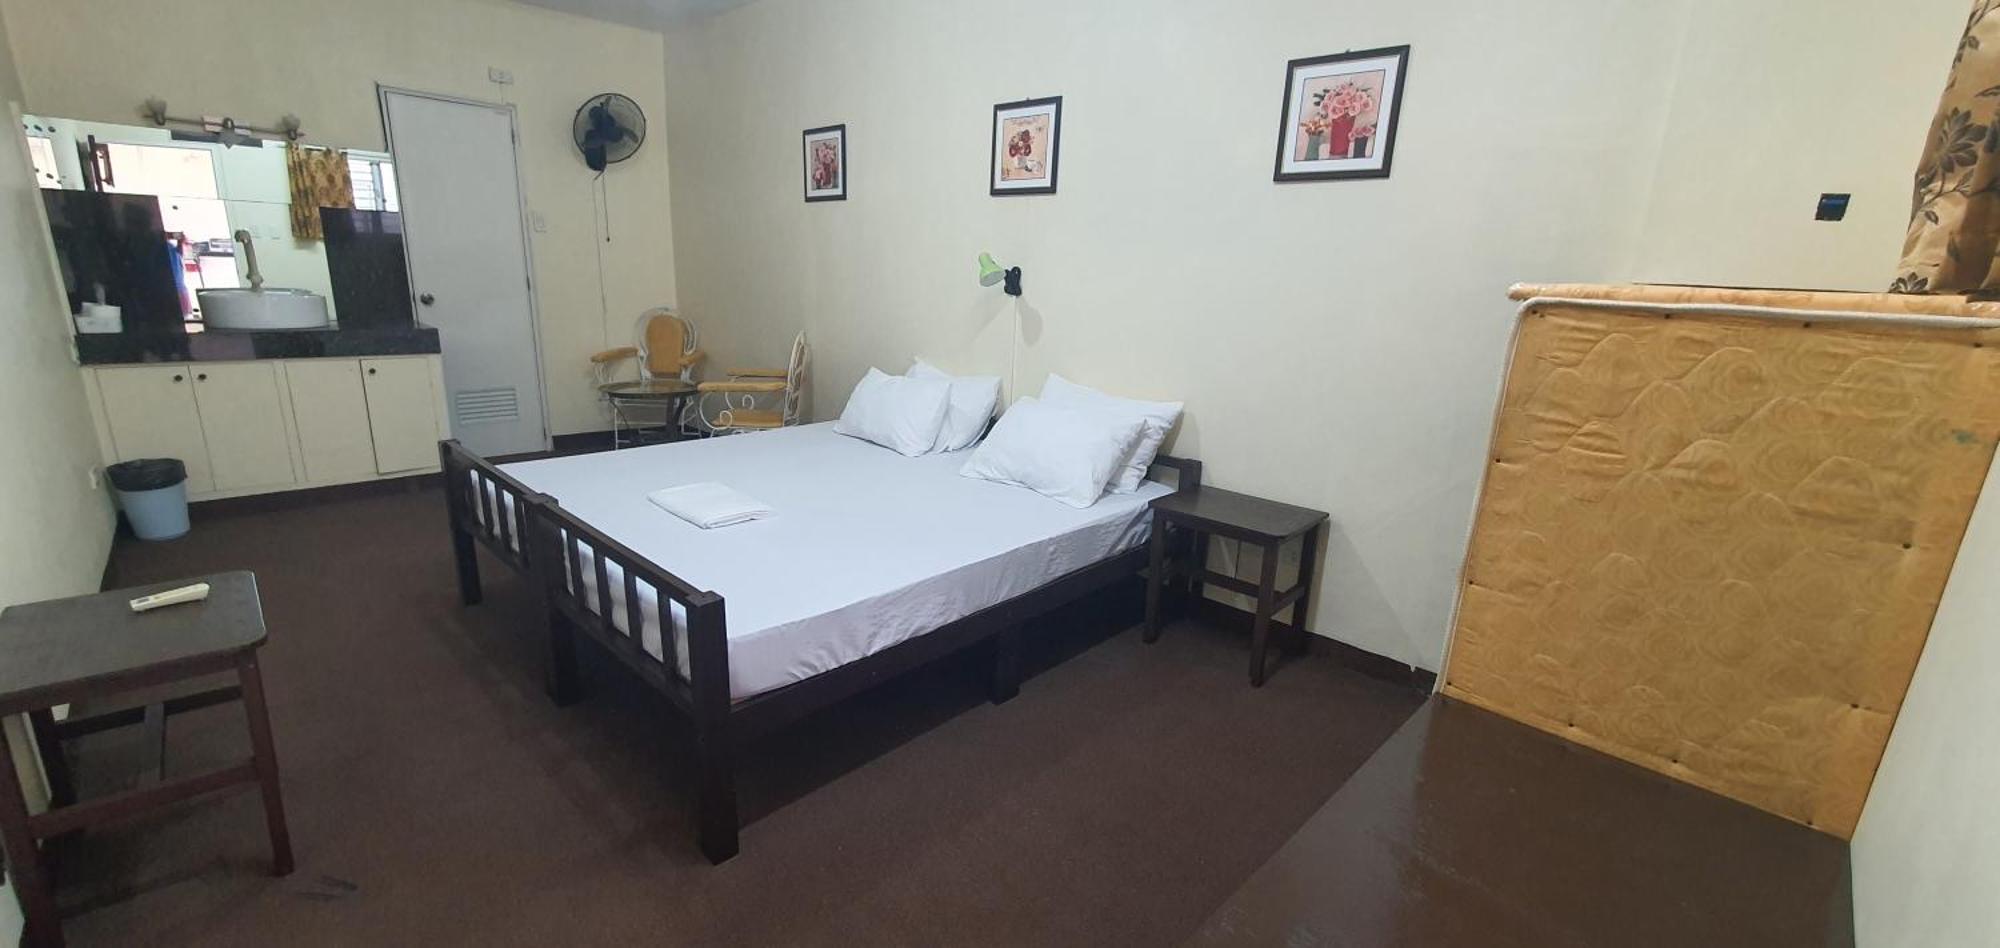 Cool Martin Family Hotel And Resort Bacoor ภายนอก รูปภาพ